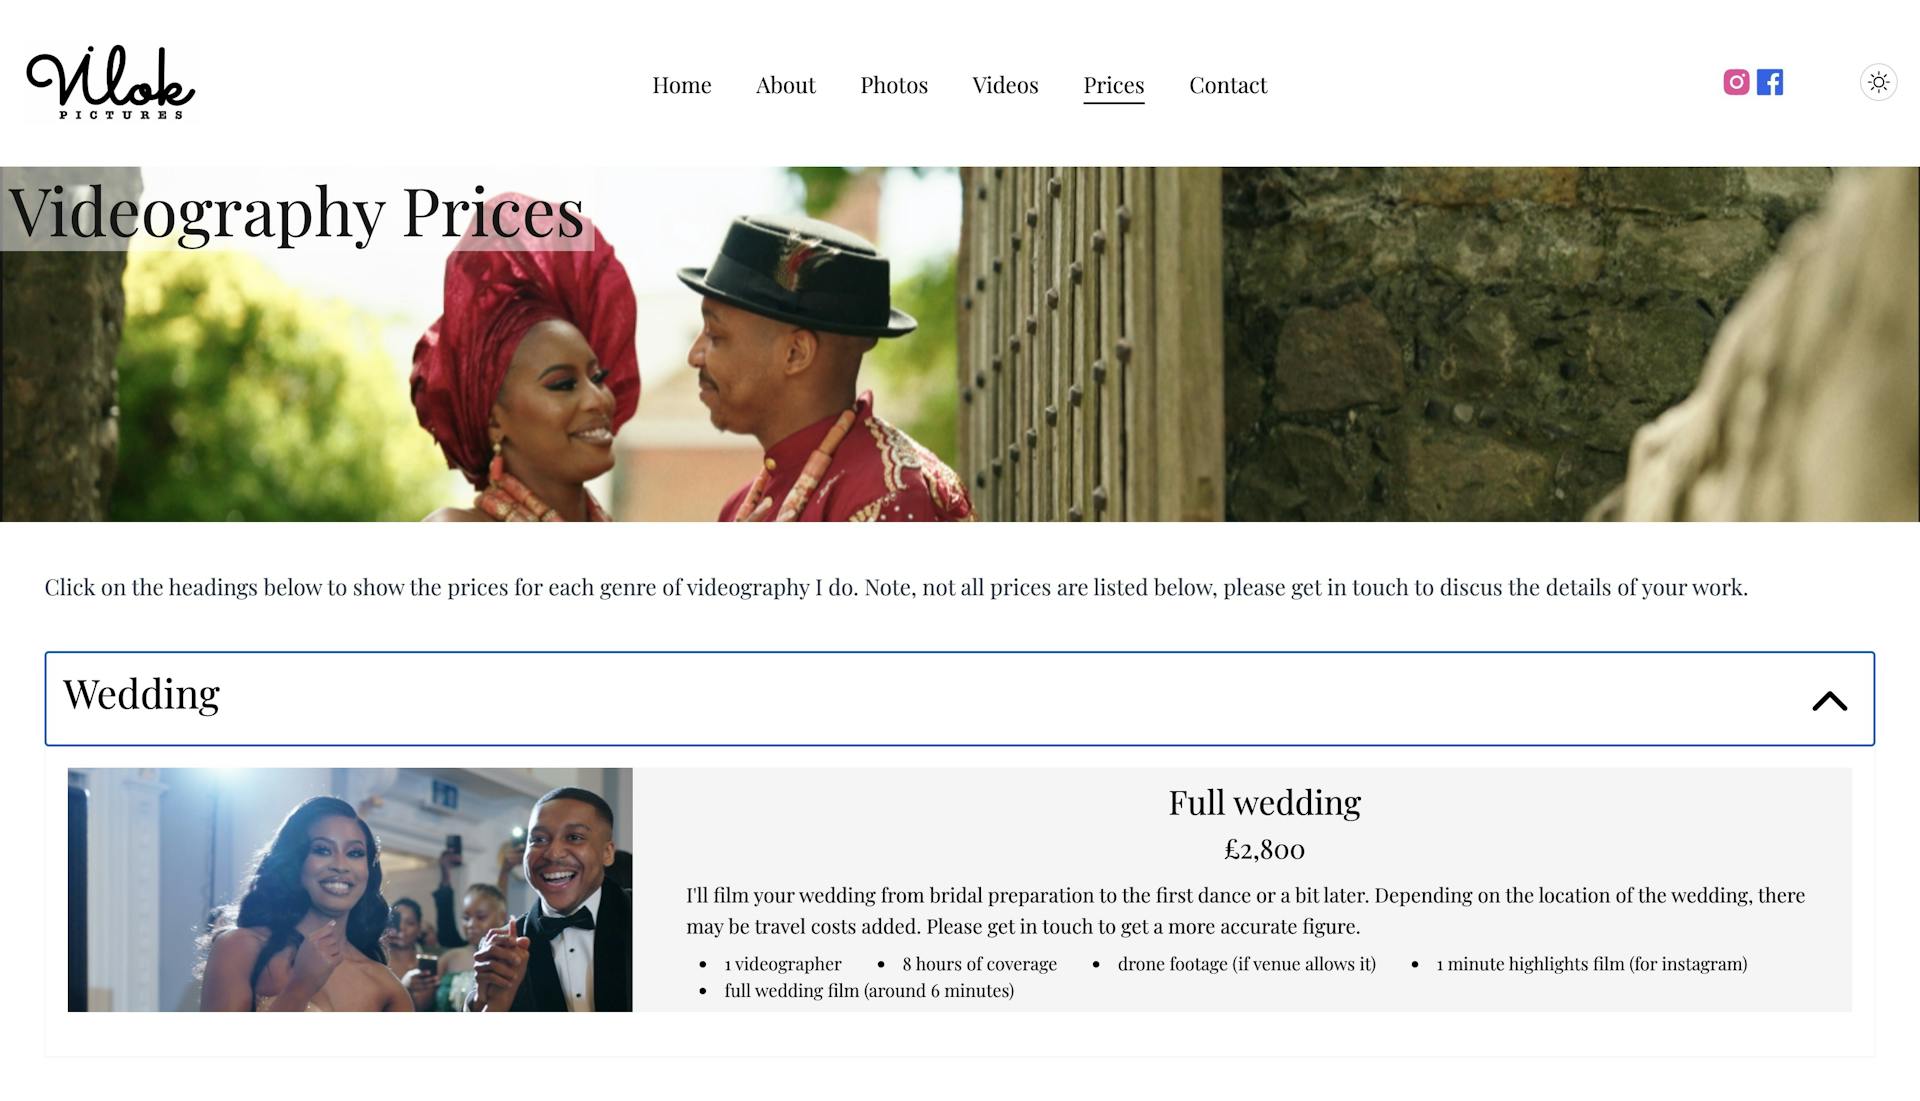 video prices page screenshot